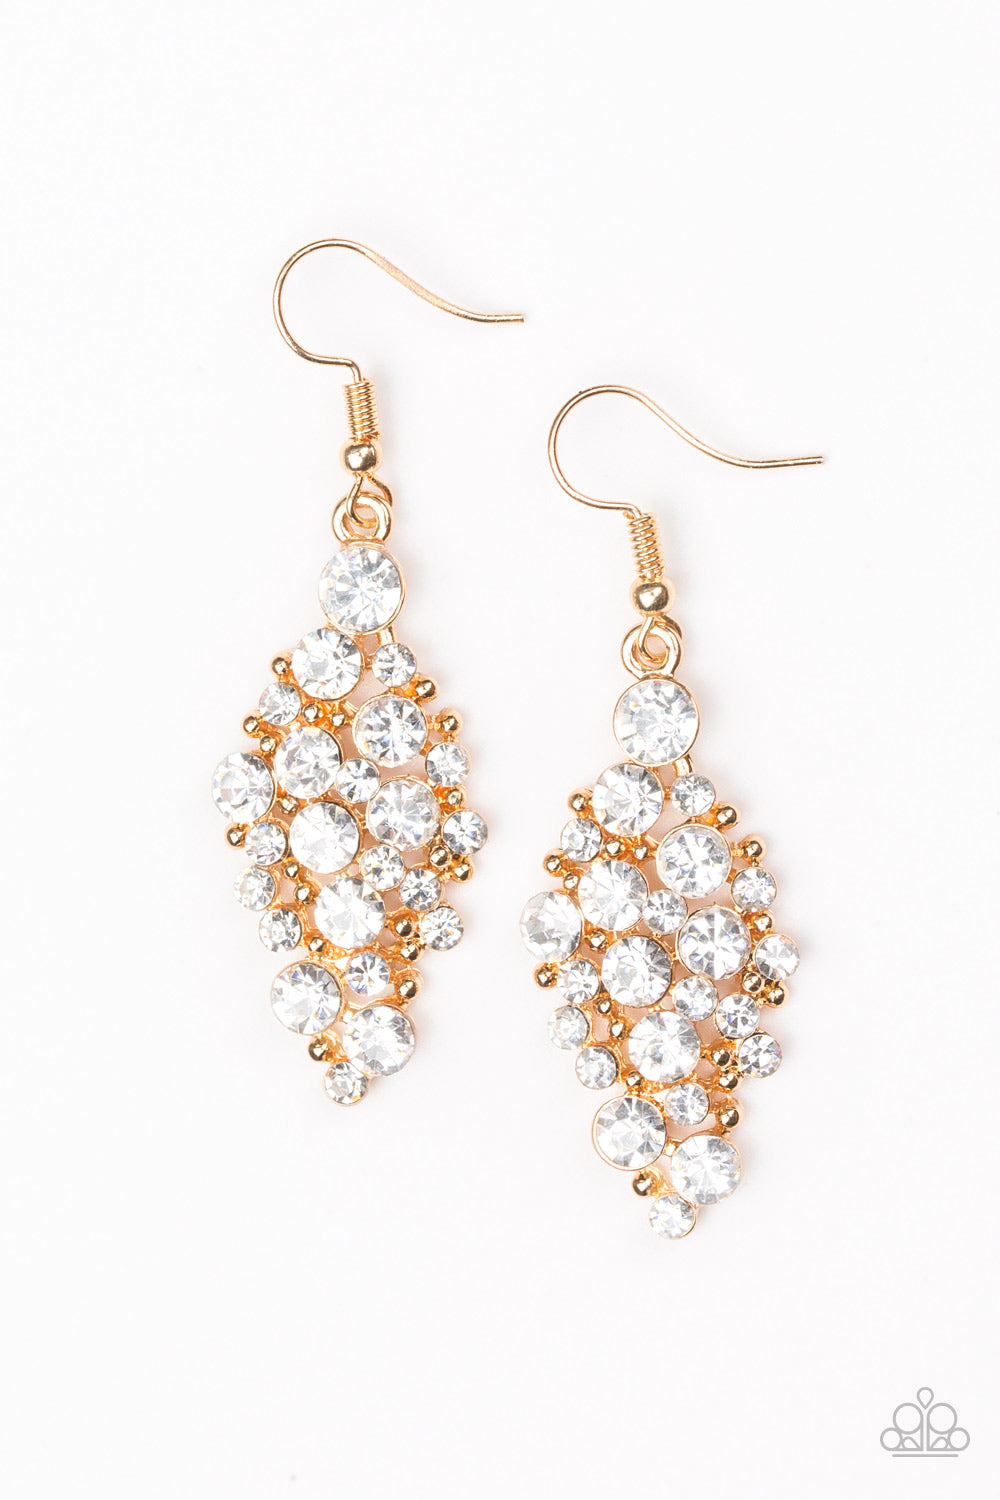 COSMICALLY CHIC - GOLD EARRING